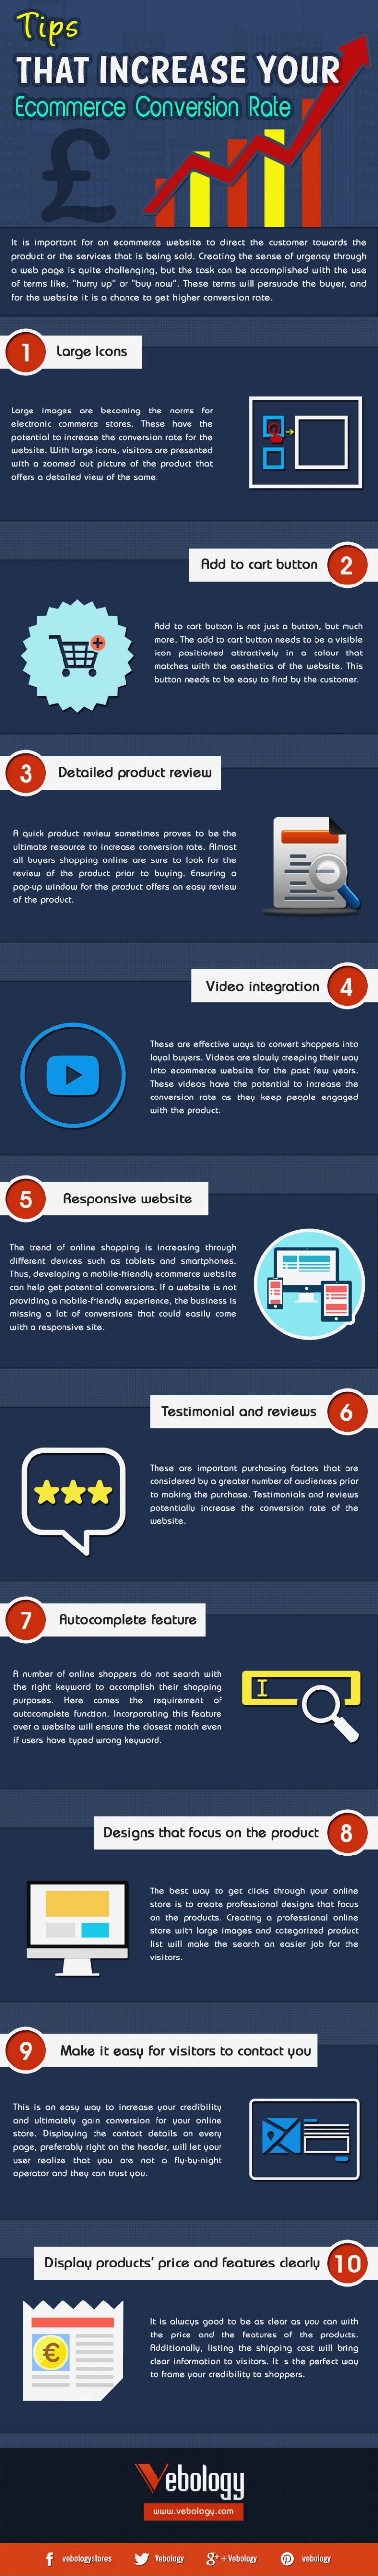 Ecommerce Conversion Rate Infographic